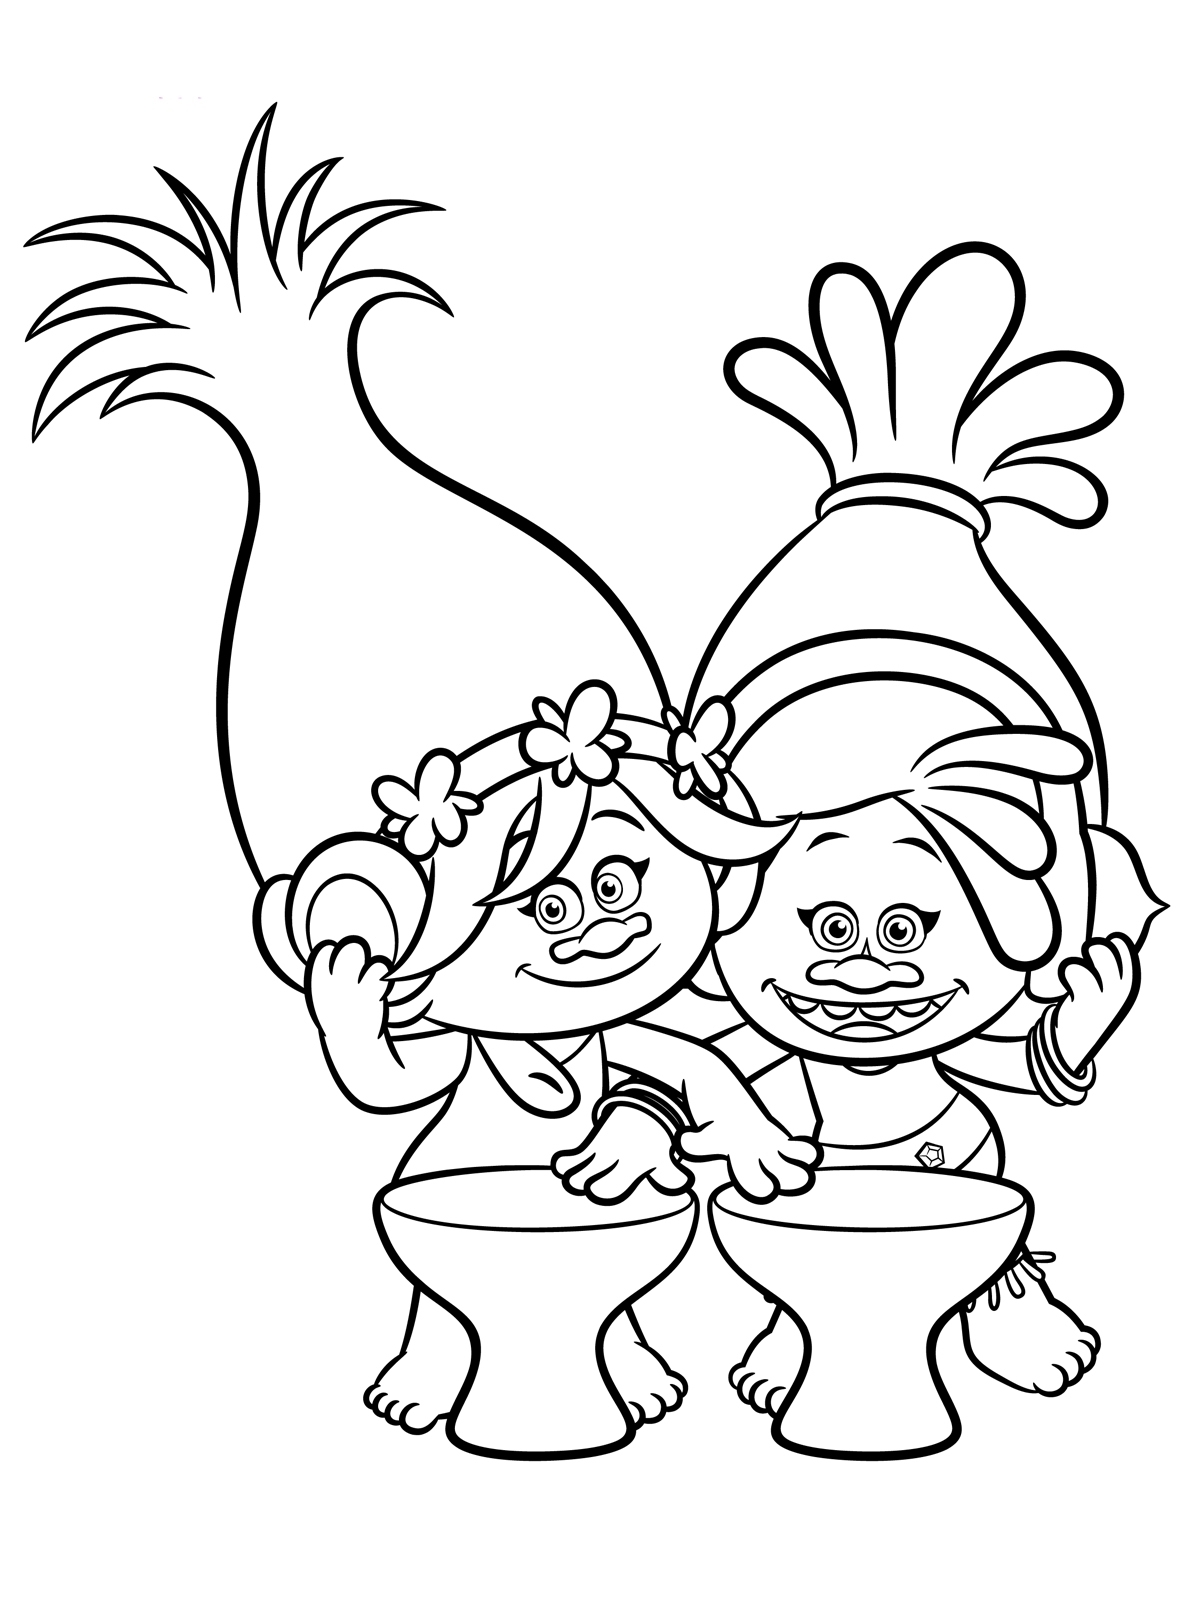 Free Trolls Coloring Pages at GetDrawings Free download